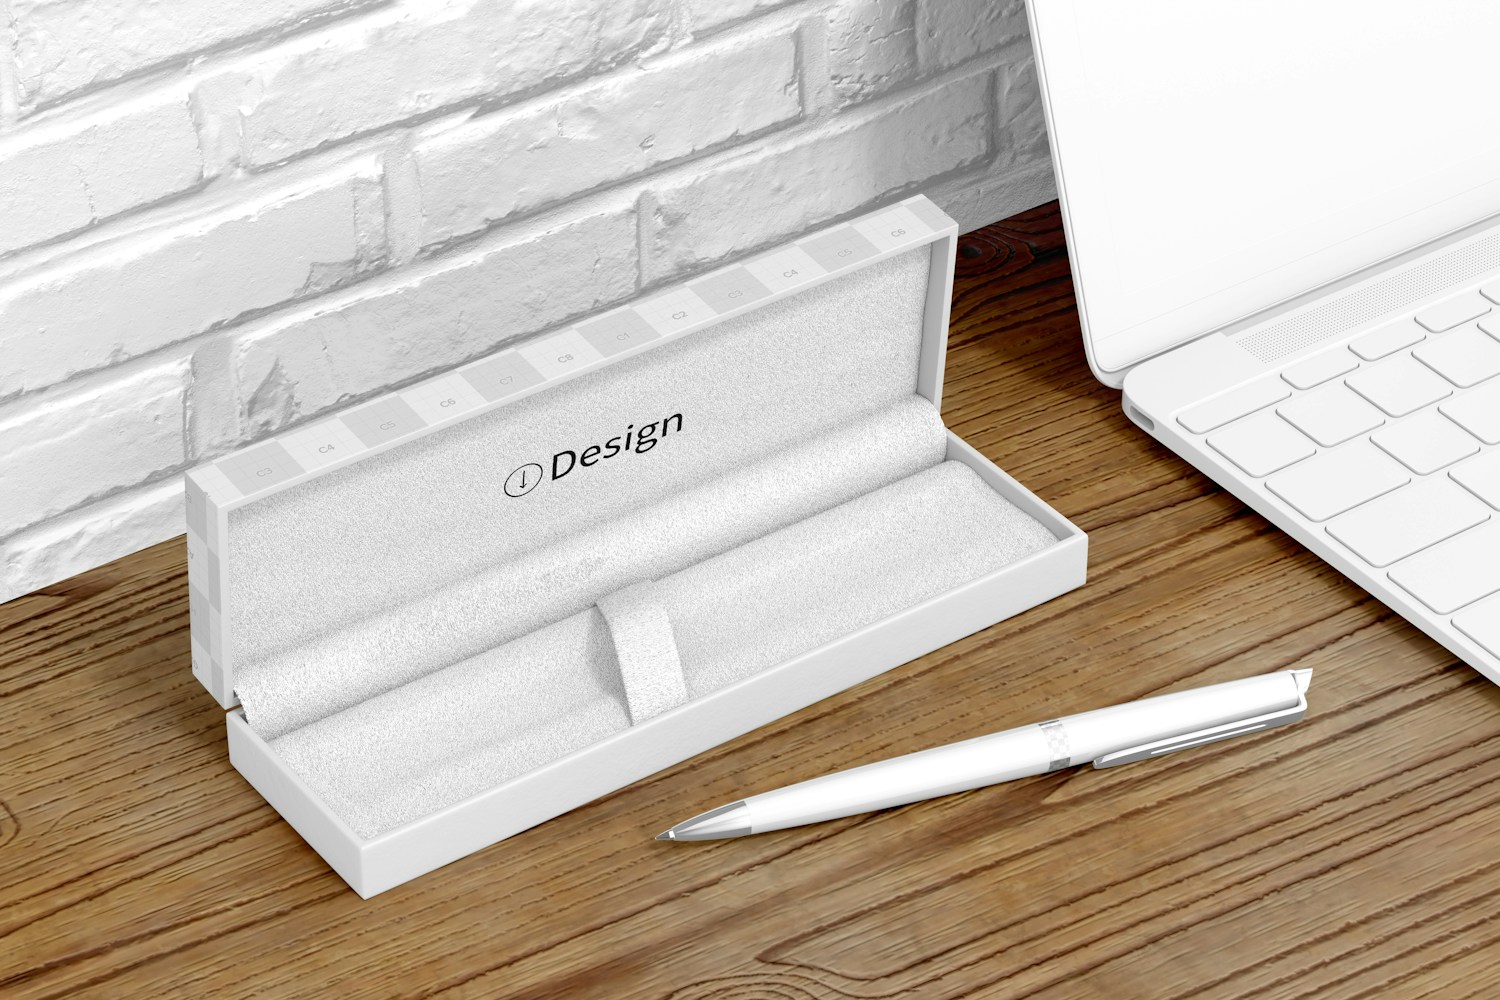 Pen In Gift Box with Laptop Mockup